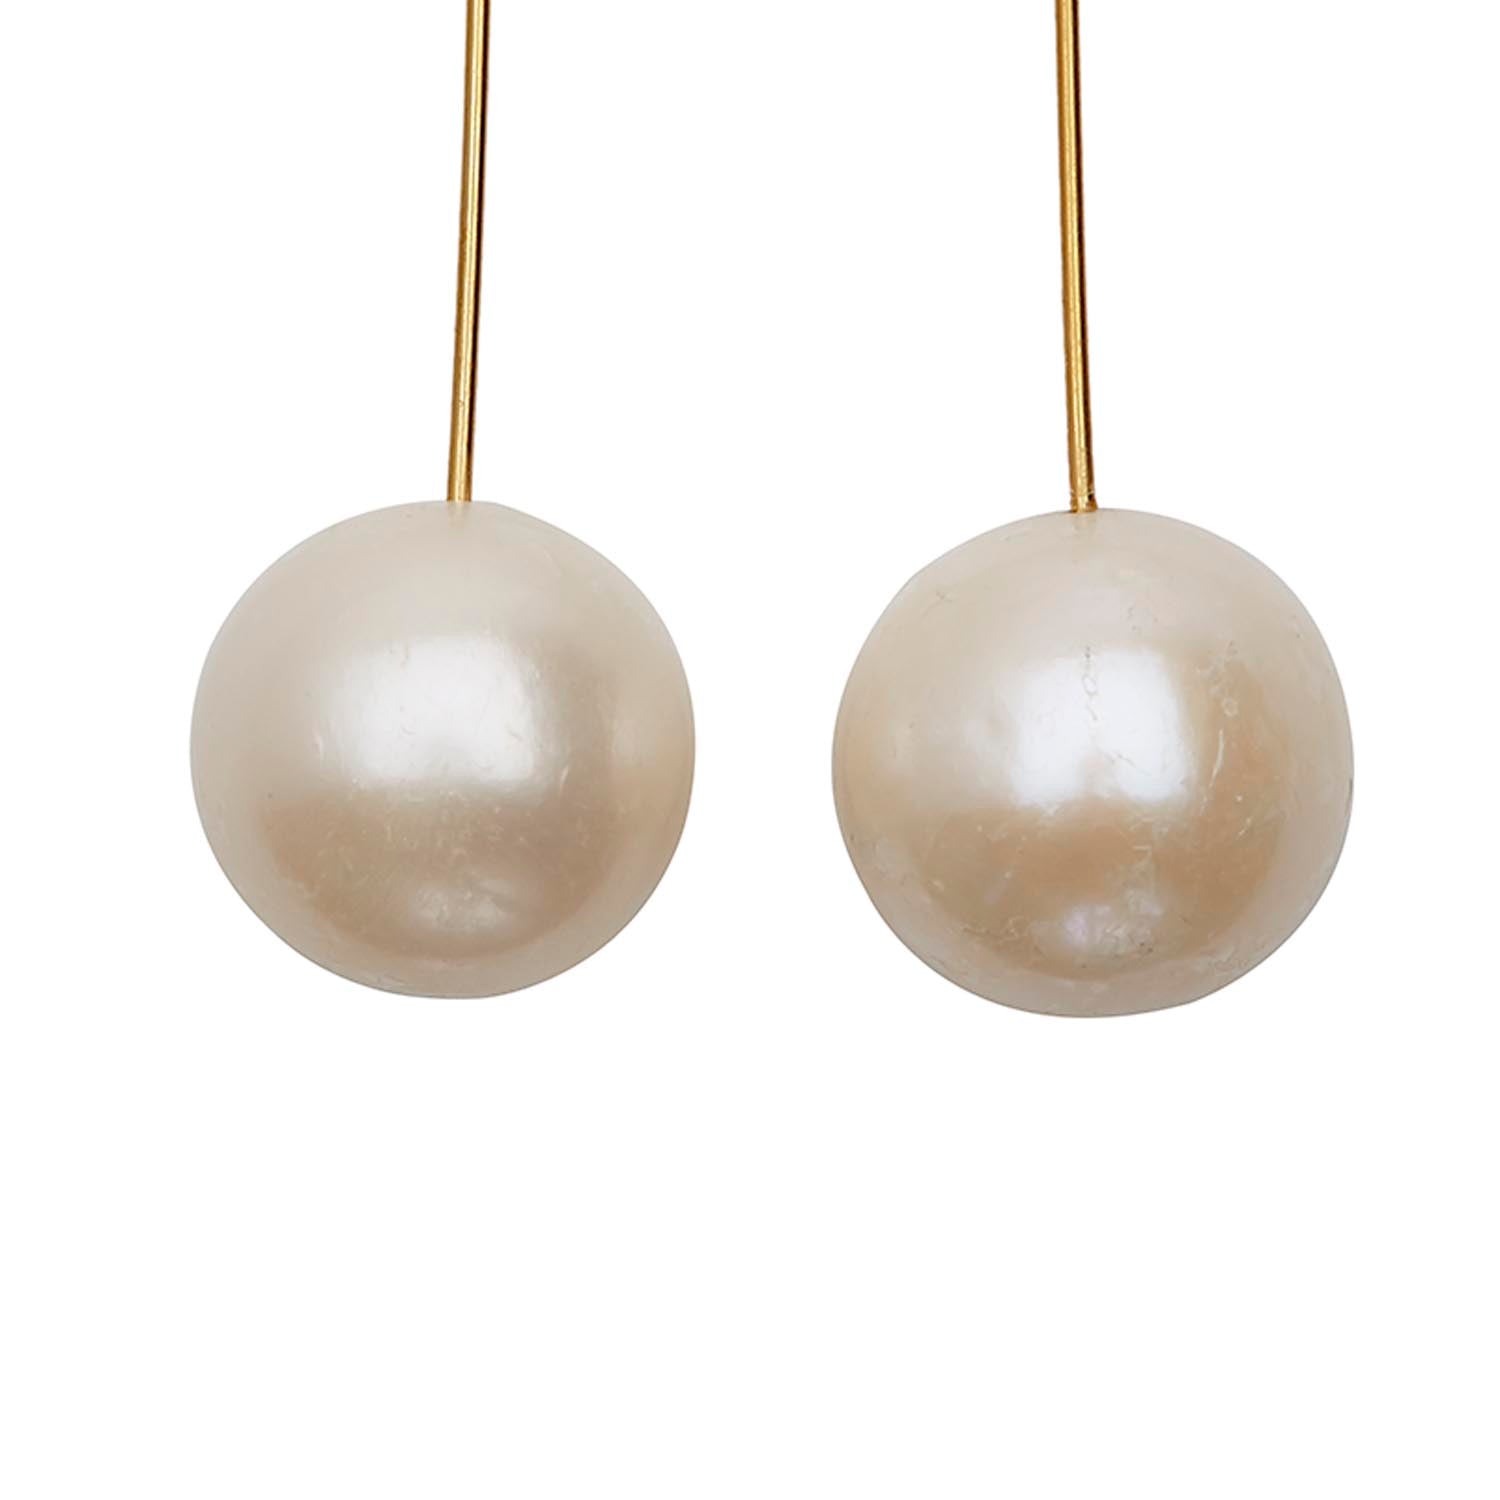 Large Round Zigzag Earrings with White Pearls